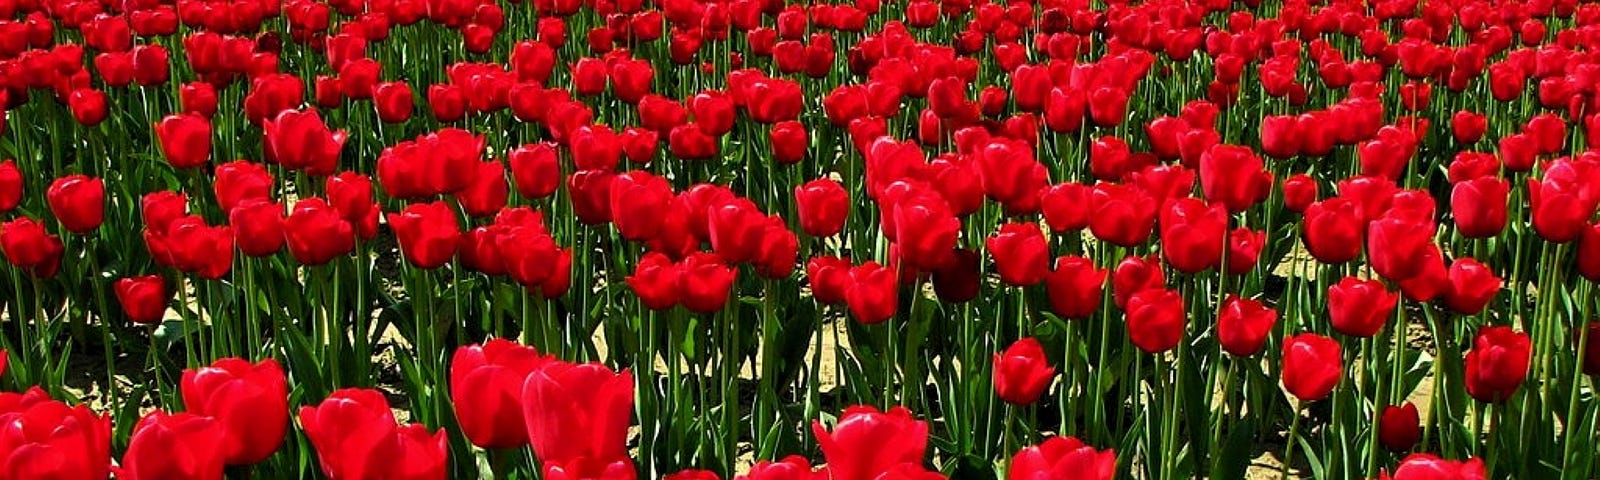 field of red tulips, one yellow tulip